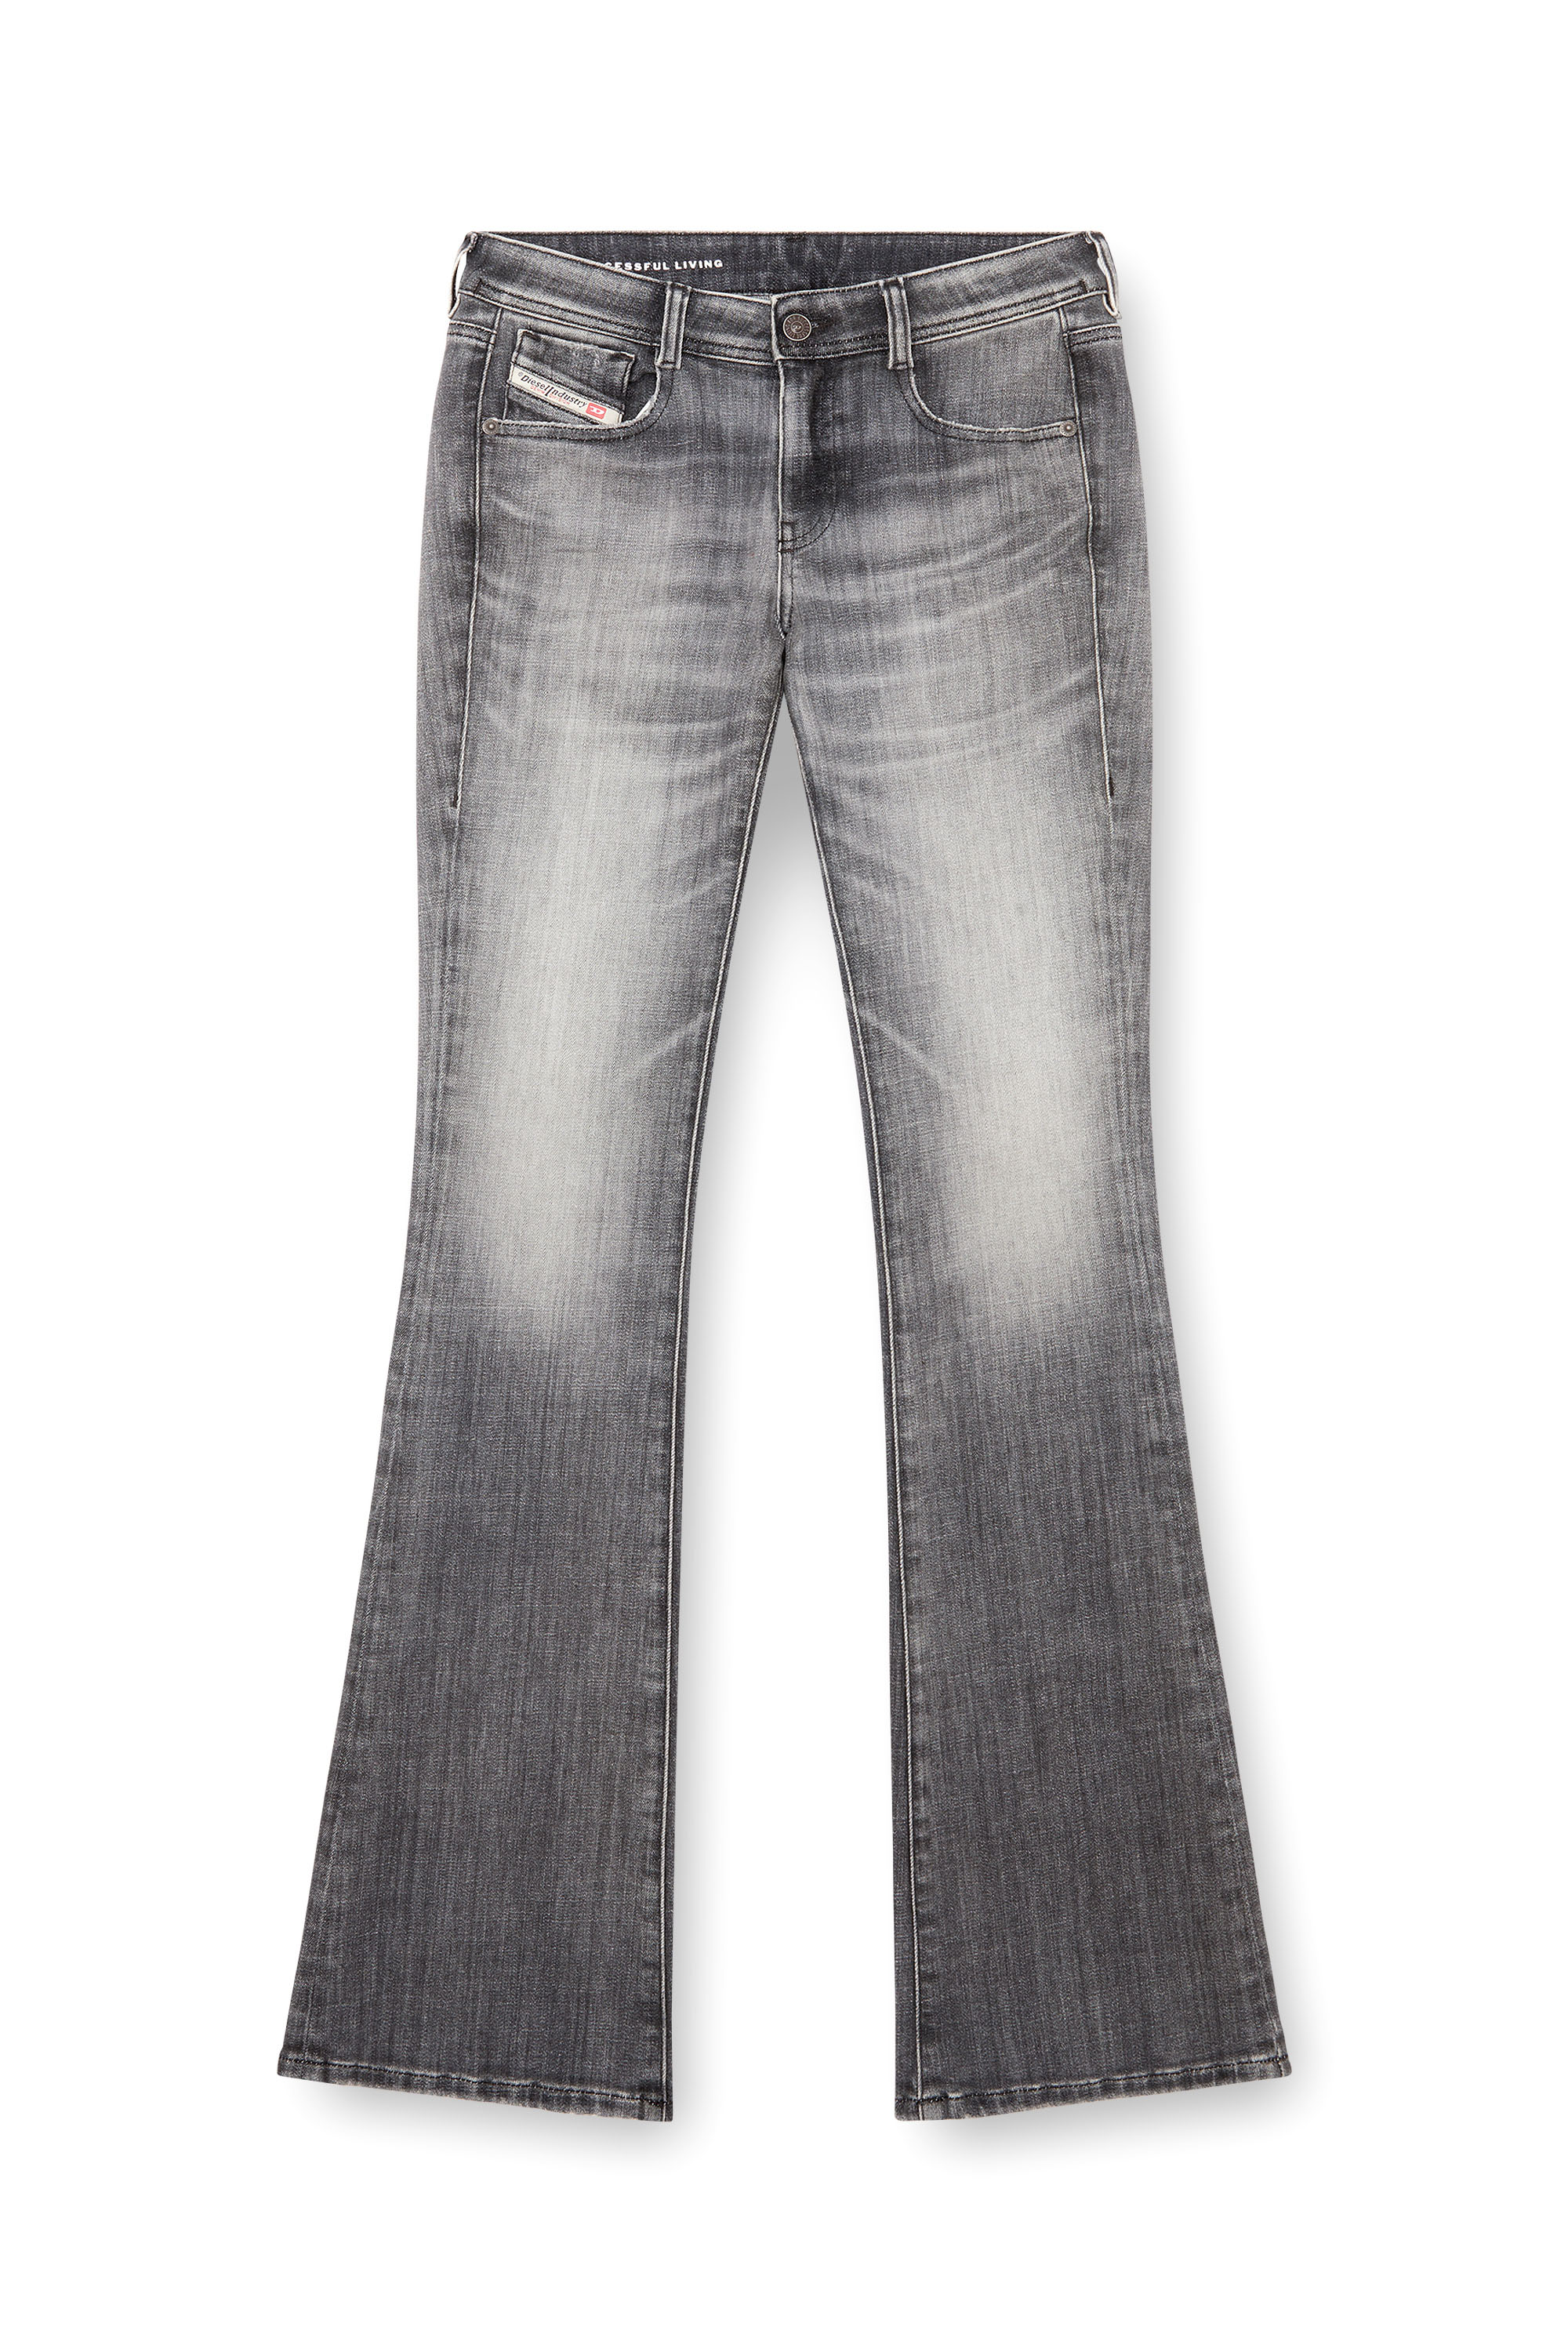 Diesel - Bootcut and Flare Jeans 1969 D-Ebbey 09J29, Mujer Bootcut y Flare Jeans - 1969 D-Ebbey in Gris - Image 3